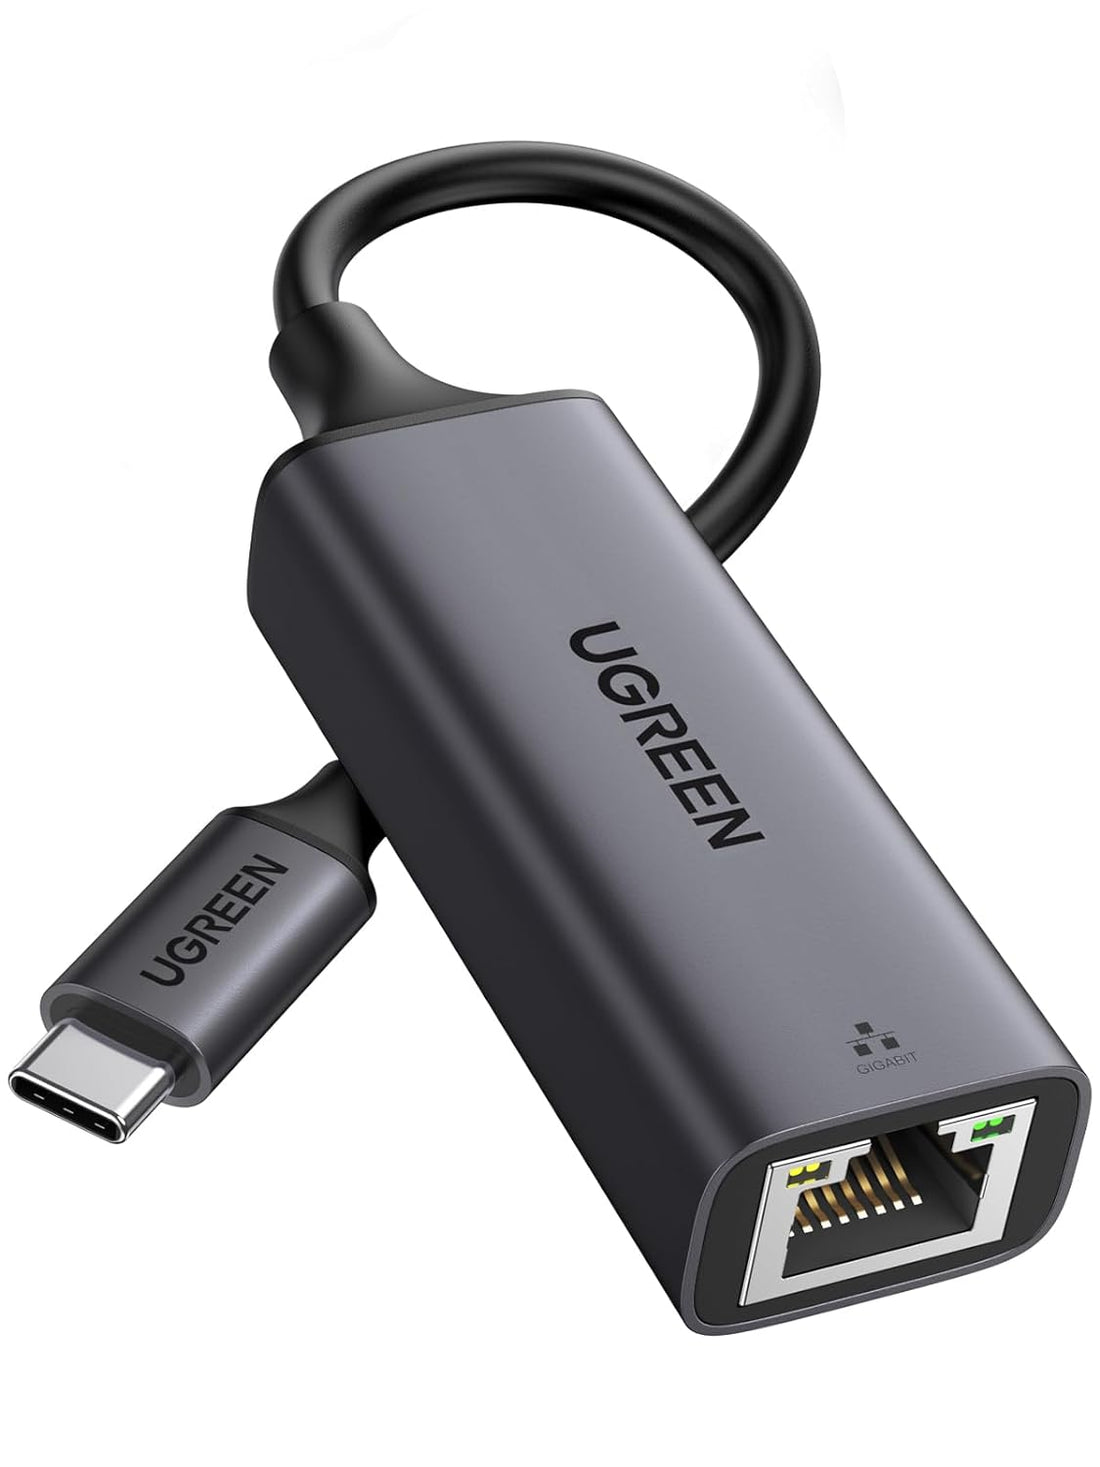 UGREEN USB C to Ethernet Adapter, 1000Mbps, RJ45, Driver-Free, Compatible with Windows, MacOS, iPadOS, ChromeOS, Android, Laptop, Tablet, Smartphone